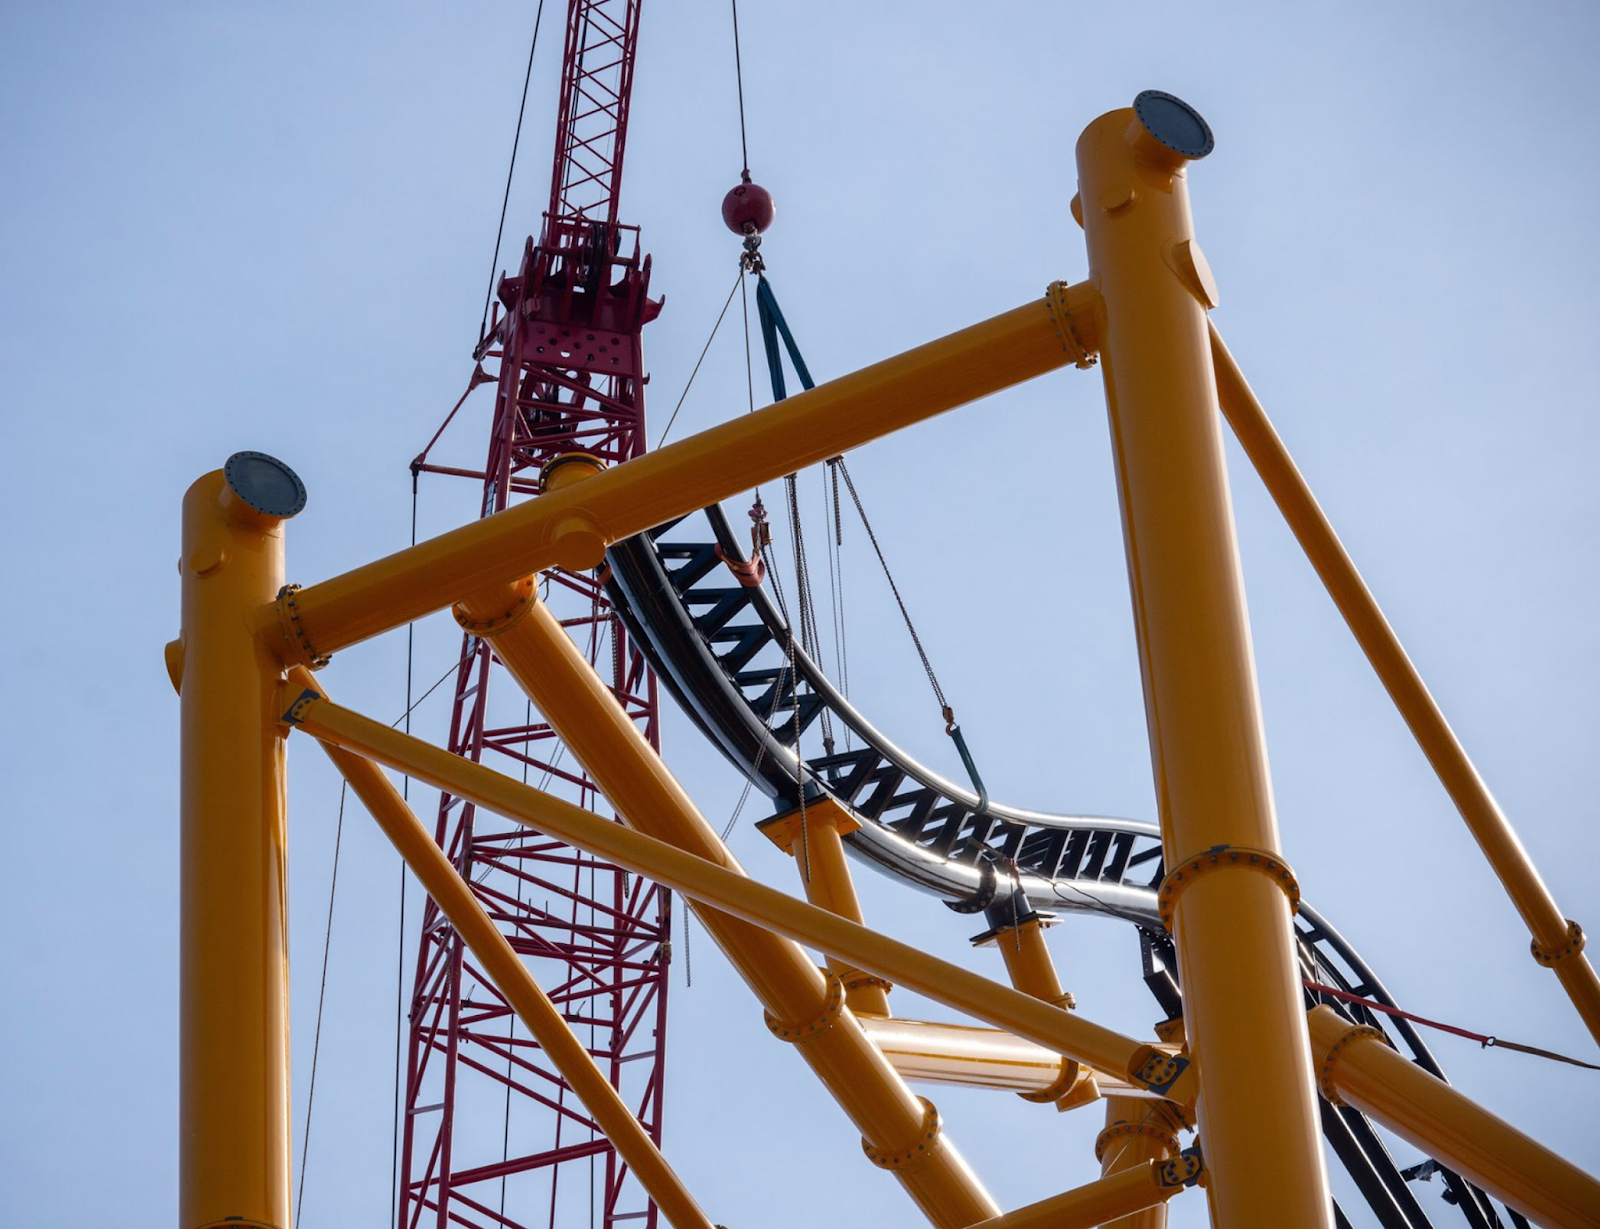 NewsPlusNotes: Kennywood Tops Off The 220 Foot Peak of The Steel Curtain